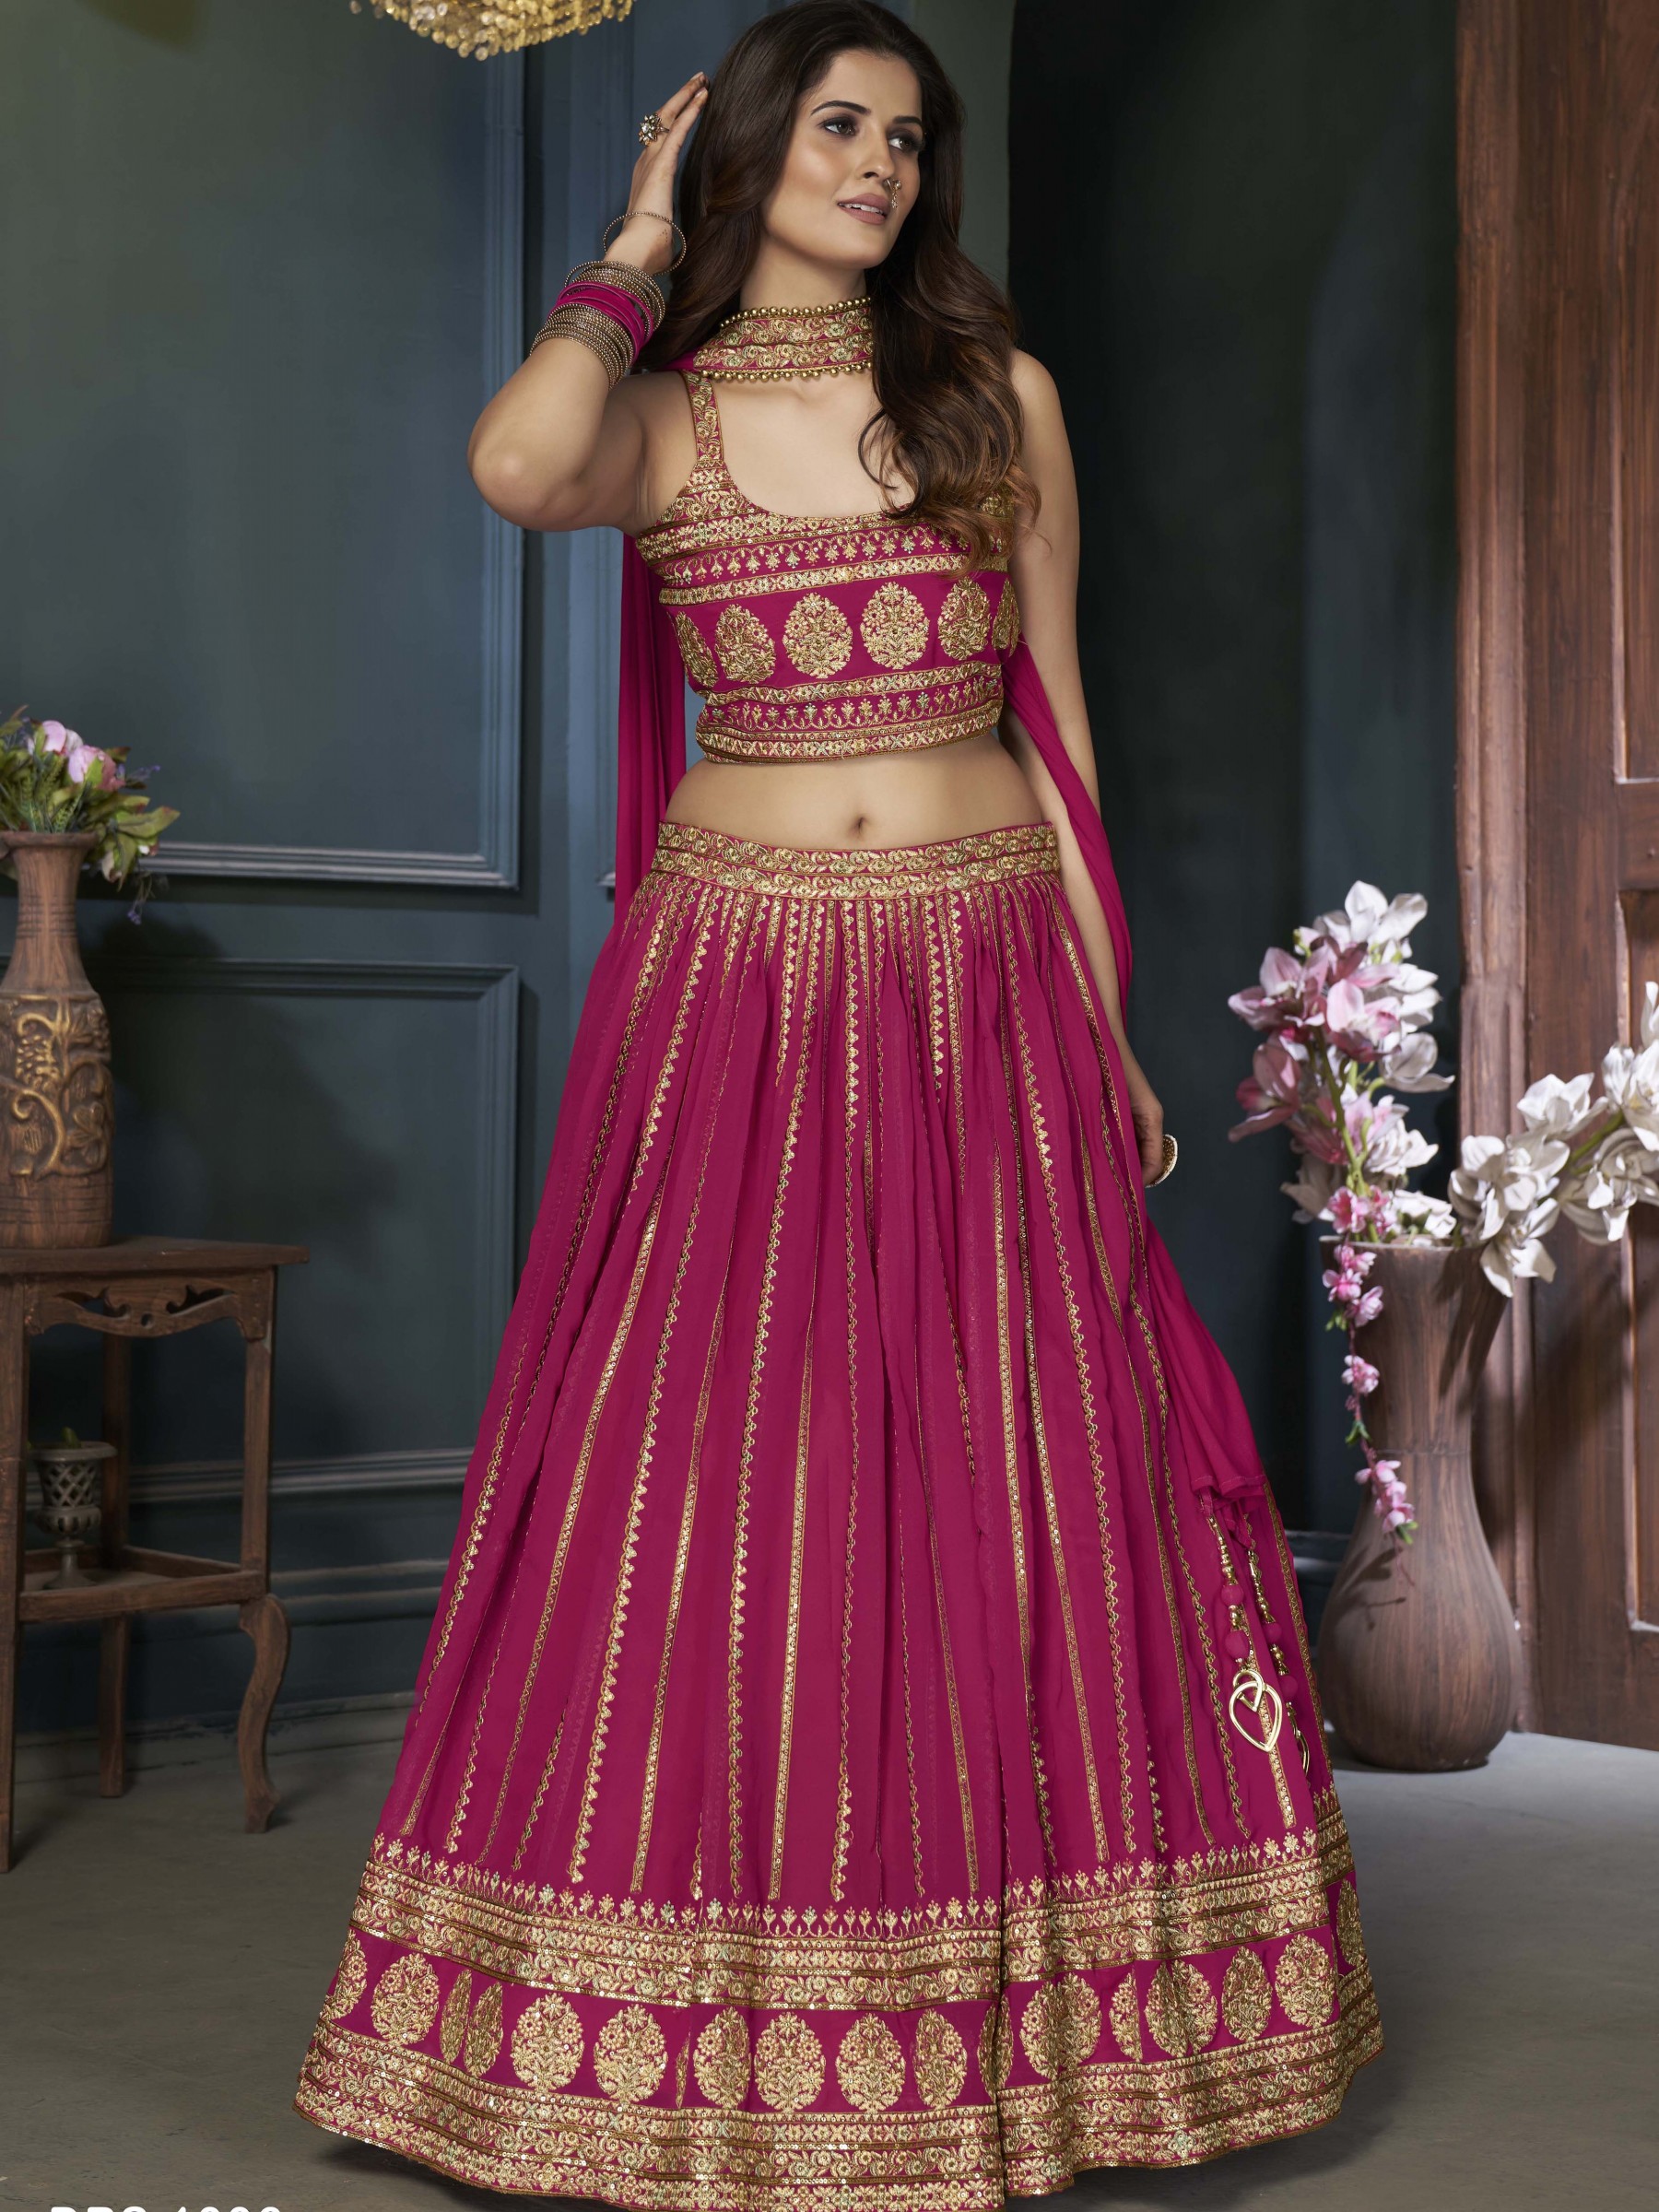 Geogratte  Fabrics Party Wear Lehenga in Magenta Color With Embrodiery  